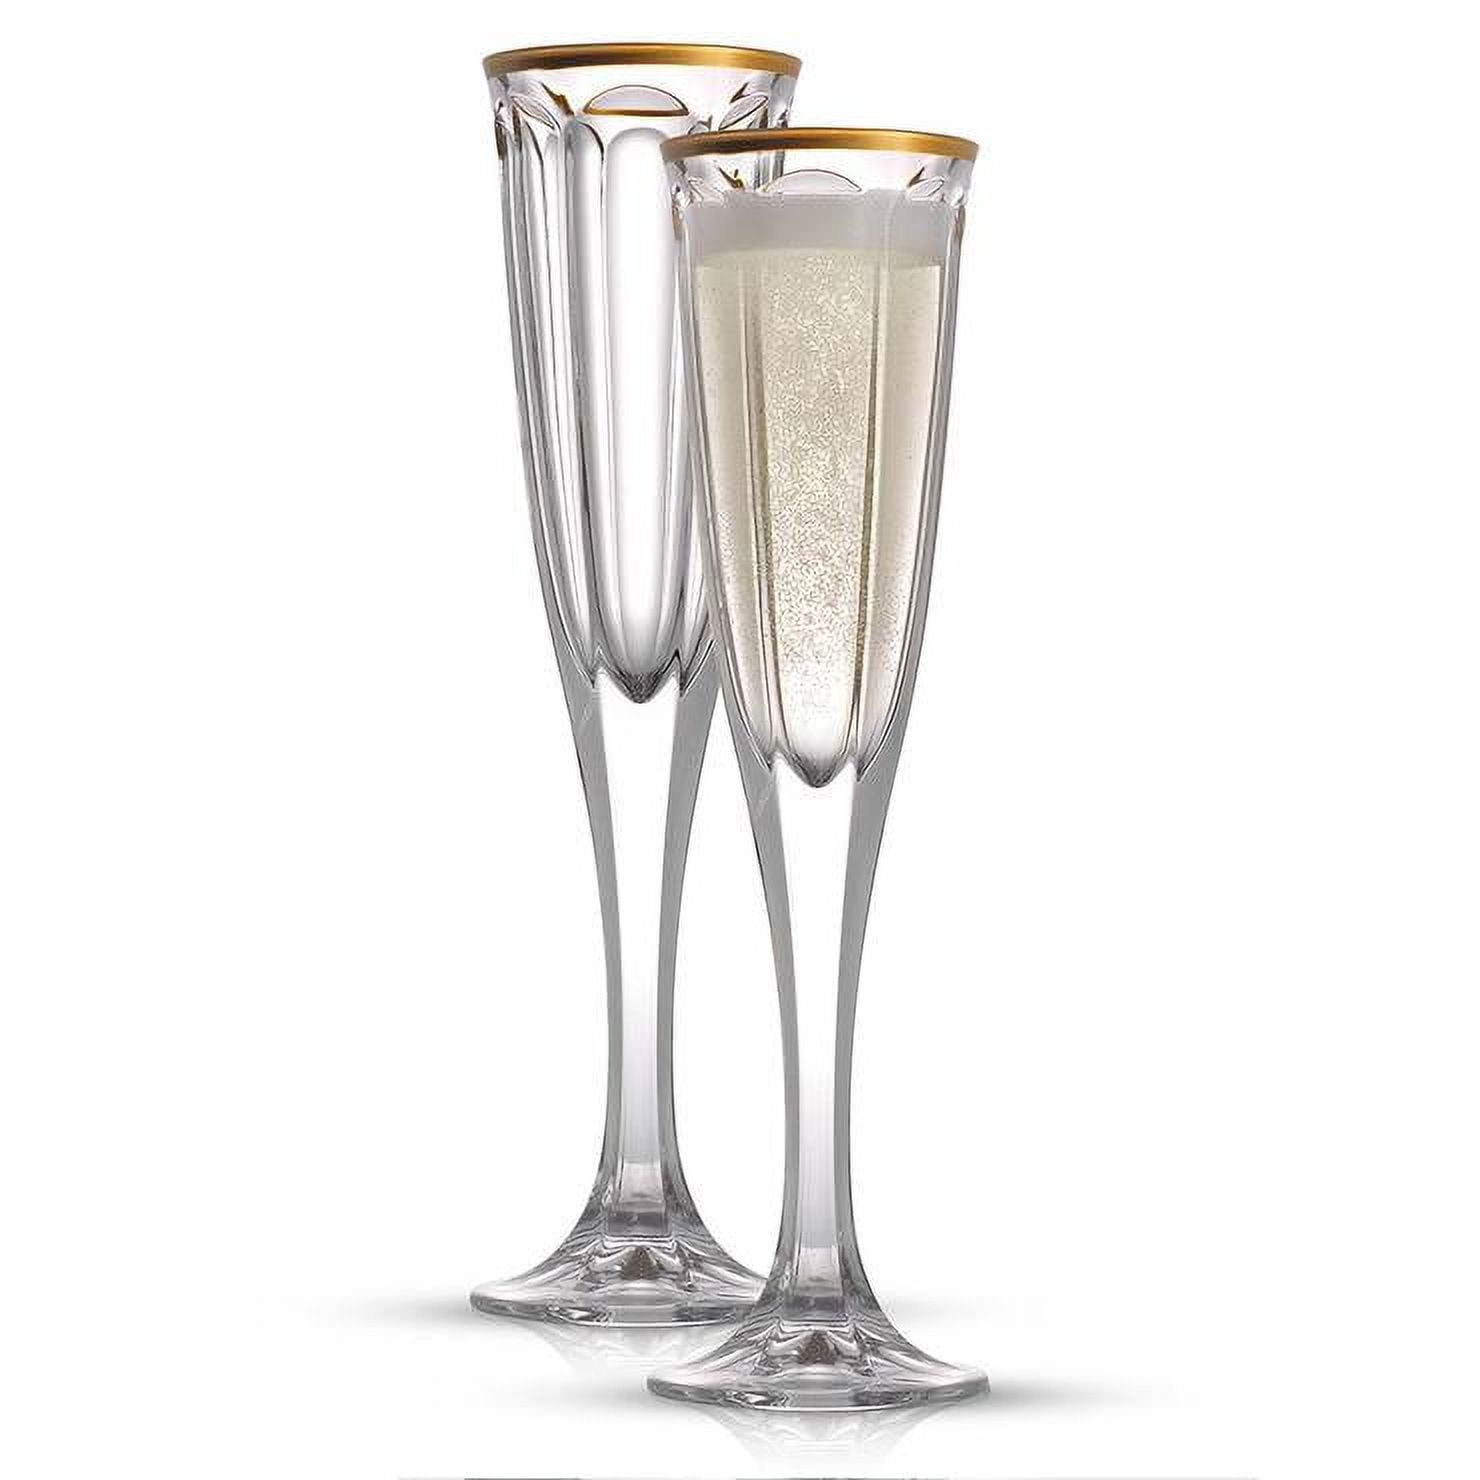 Jozen Gift Champagne Flutes - Crystal Glass Metal Base With Crystal Stones,  Set of 2 Toasting Flute …See more Jozen Gift Champagne Flutes - Crystal